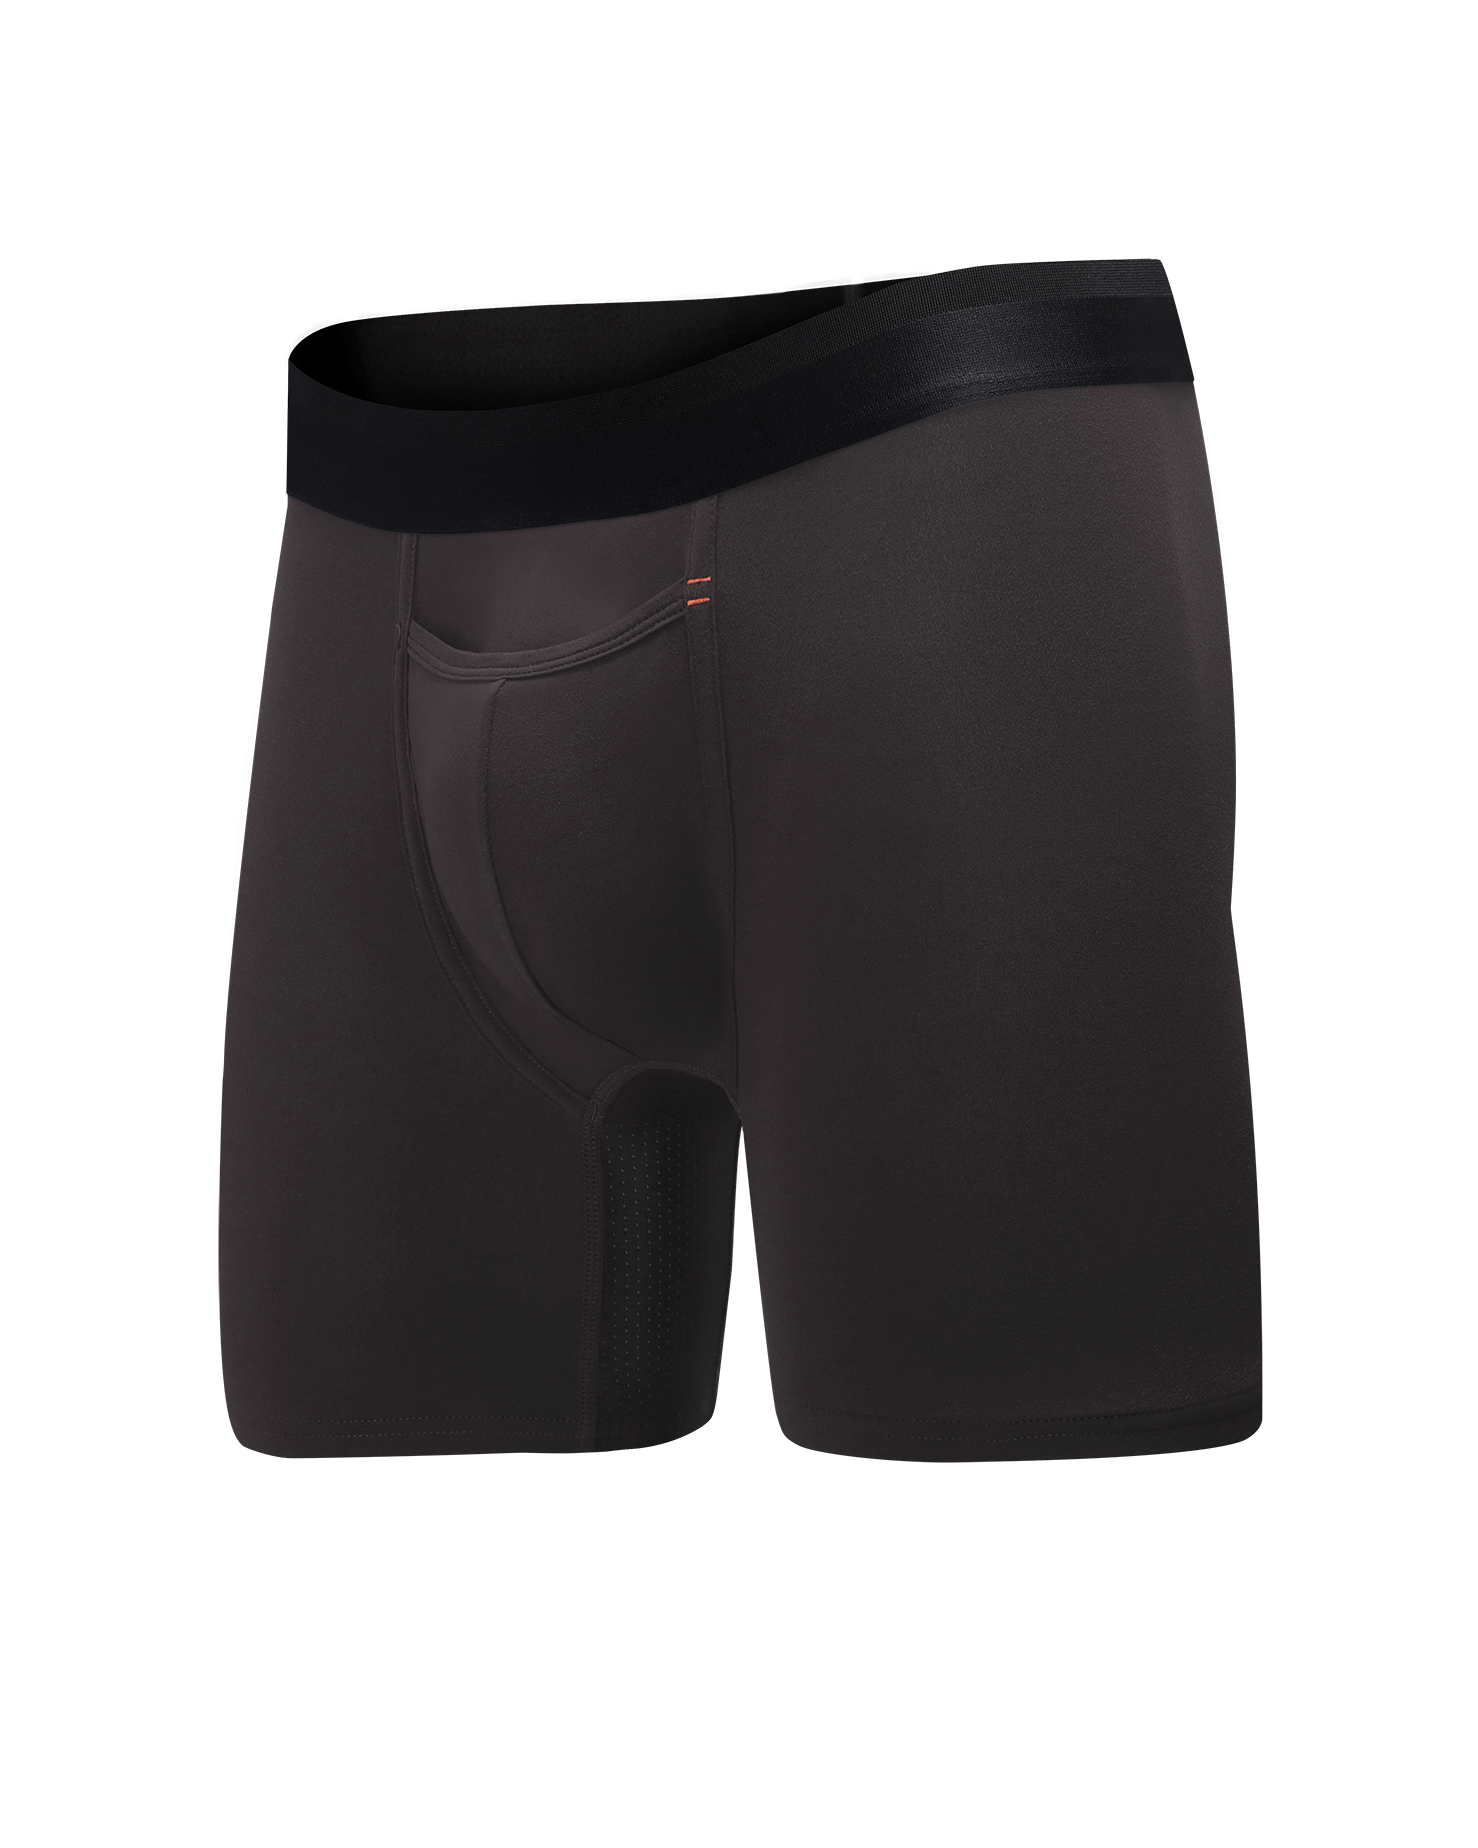 3 Pack Boxer Briefs in Black - TAILORED ATHLETE - ROW